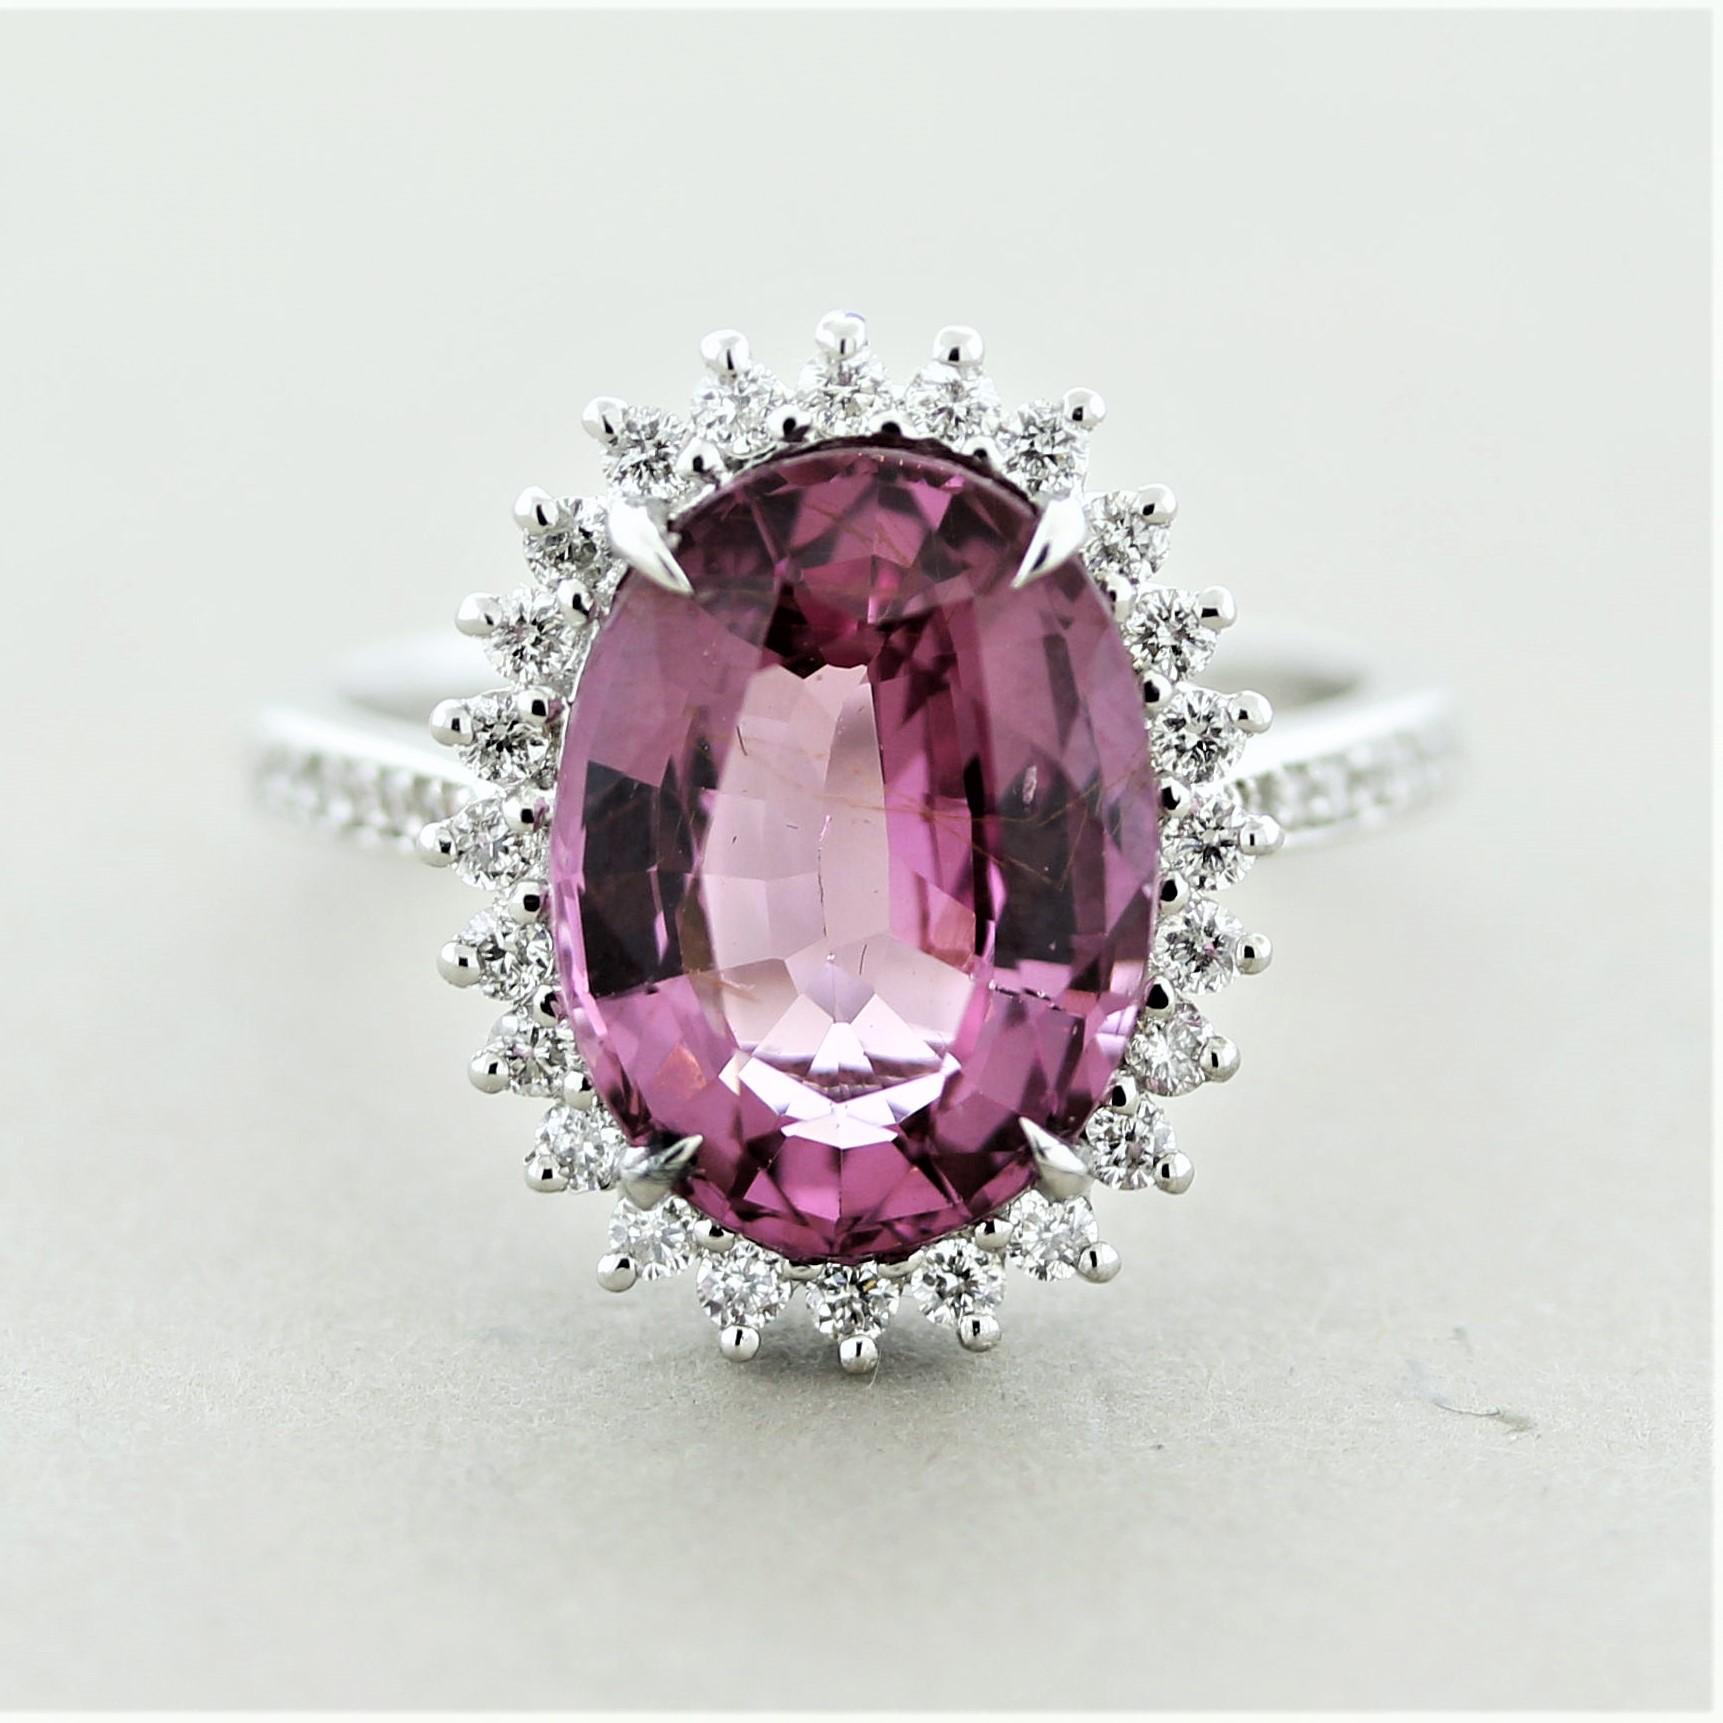 A beautiful ring with a special spinel weighing 5.57 carats which has a bright and vibrant pink color. It is free from eye-visible inclusions allowing the stones natural brilliance to shine. It is accented by 0.43 carats of round brilliant-cut